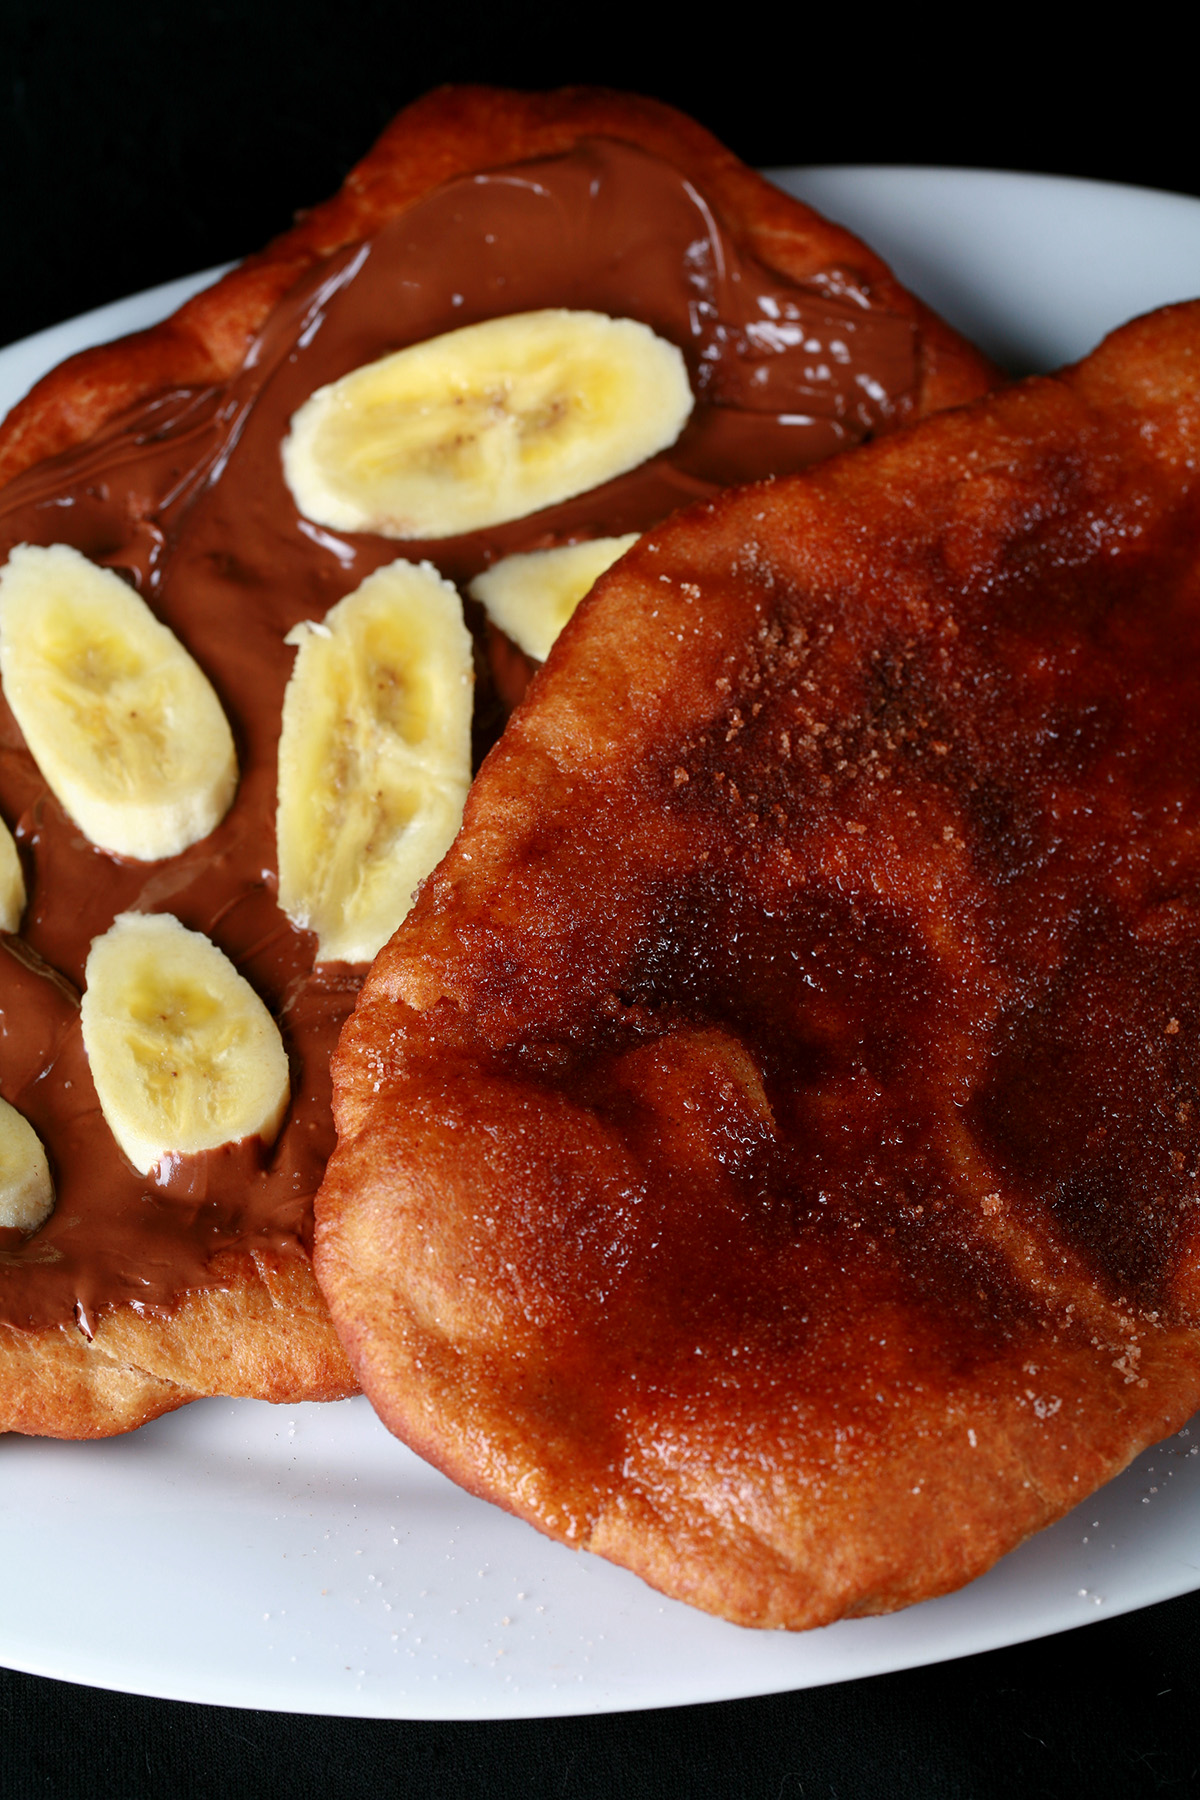 Two gluten-free fried pastries - made from this Gluten-free Beaver Tail recipe - are arranged on a plate. Both are oblong pieces of fried dough. One is topped with cinnamon sugar, the other is spread with Nutella and topped with sliced banana.